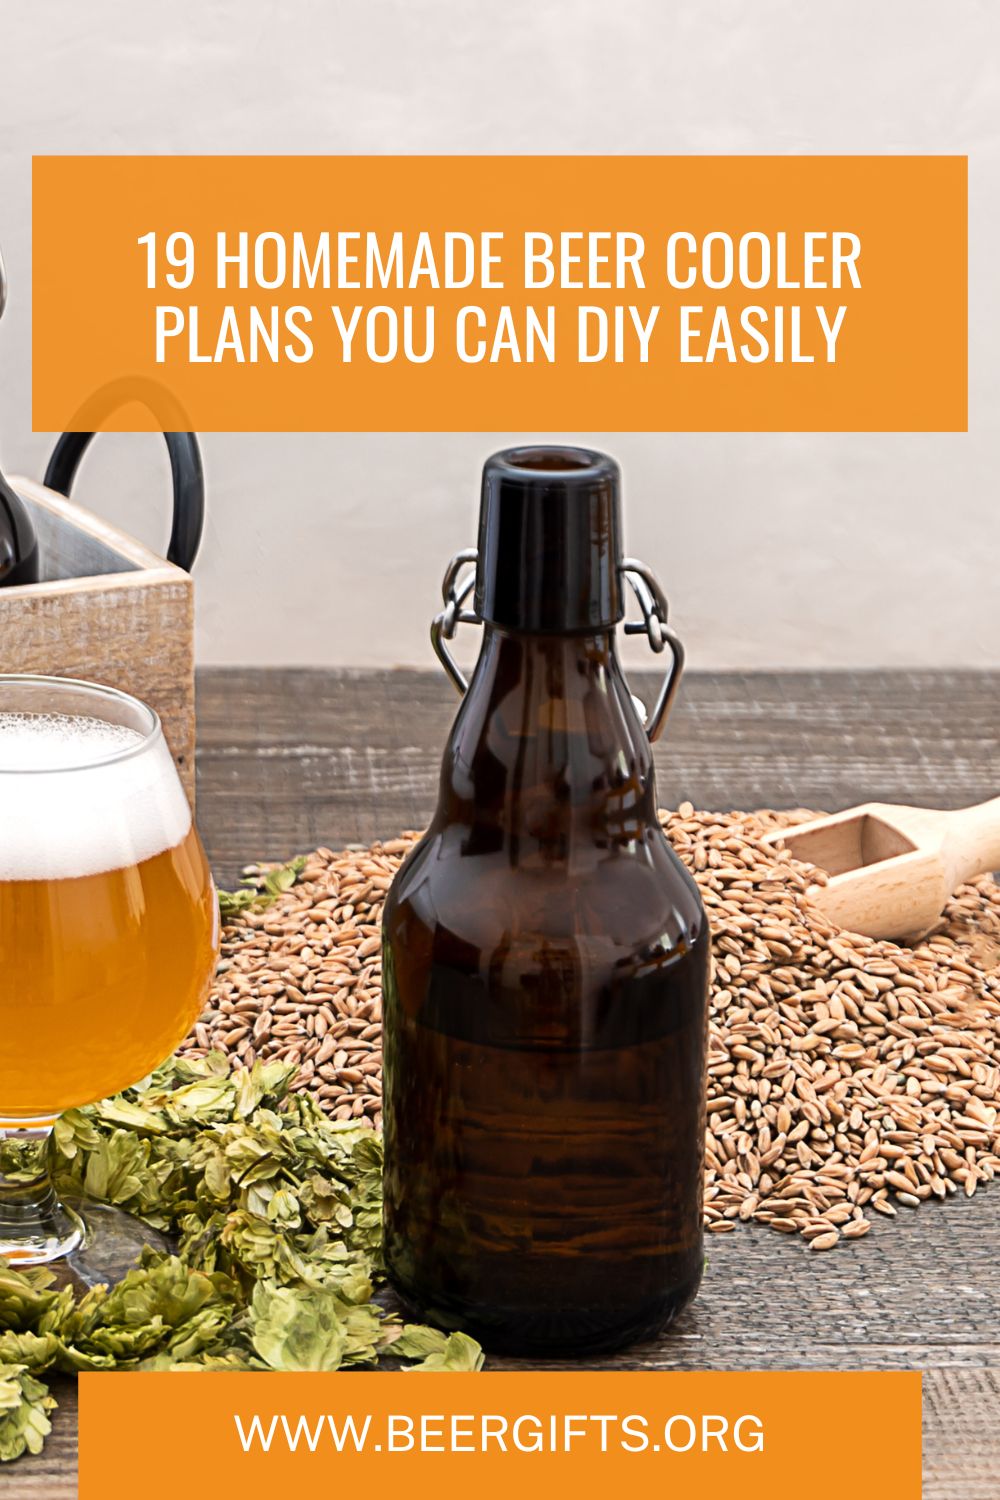 19 Homemade Beer Cooler Plans You Can DIY Easily10